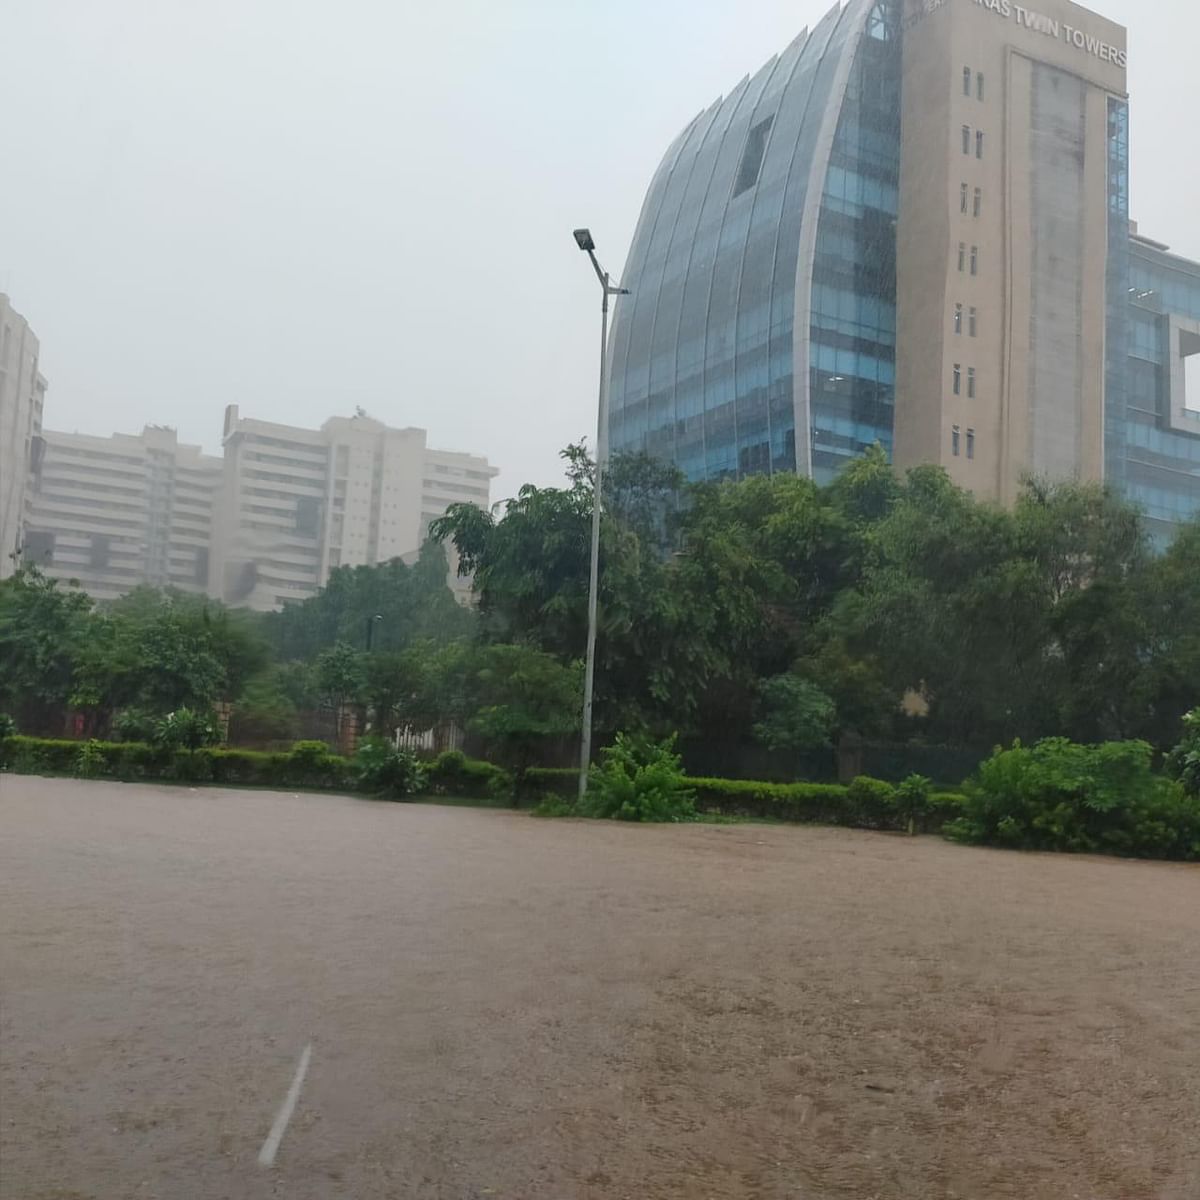 Visuals from Gurugram showed many areas, including an underpass, flooded.